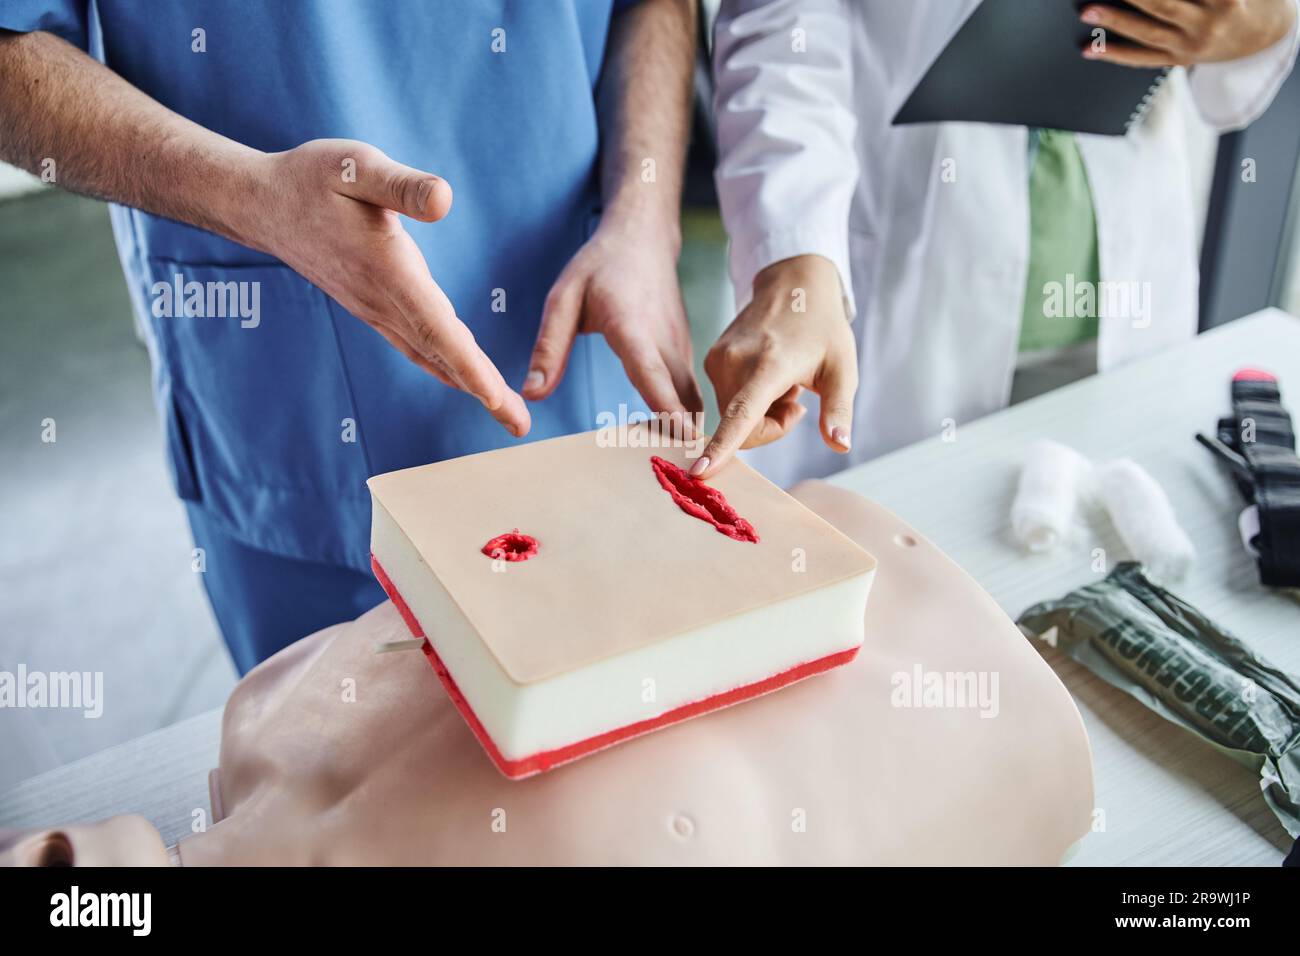 medical seminar, partial view of professional healthcare worker and student pointing at wound care simulator near CPR manikin and bandages, first aid Stock Photo